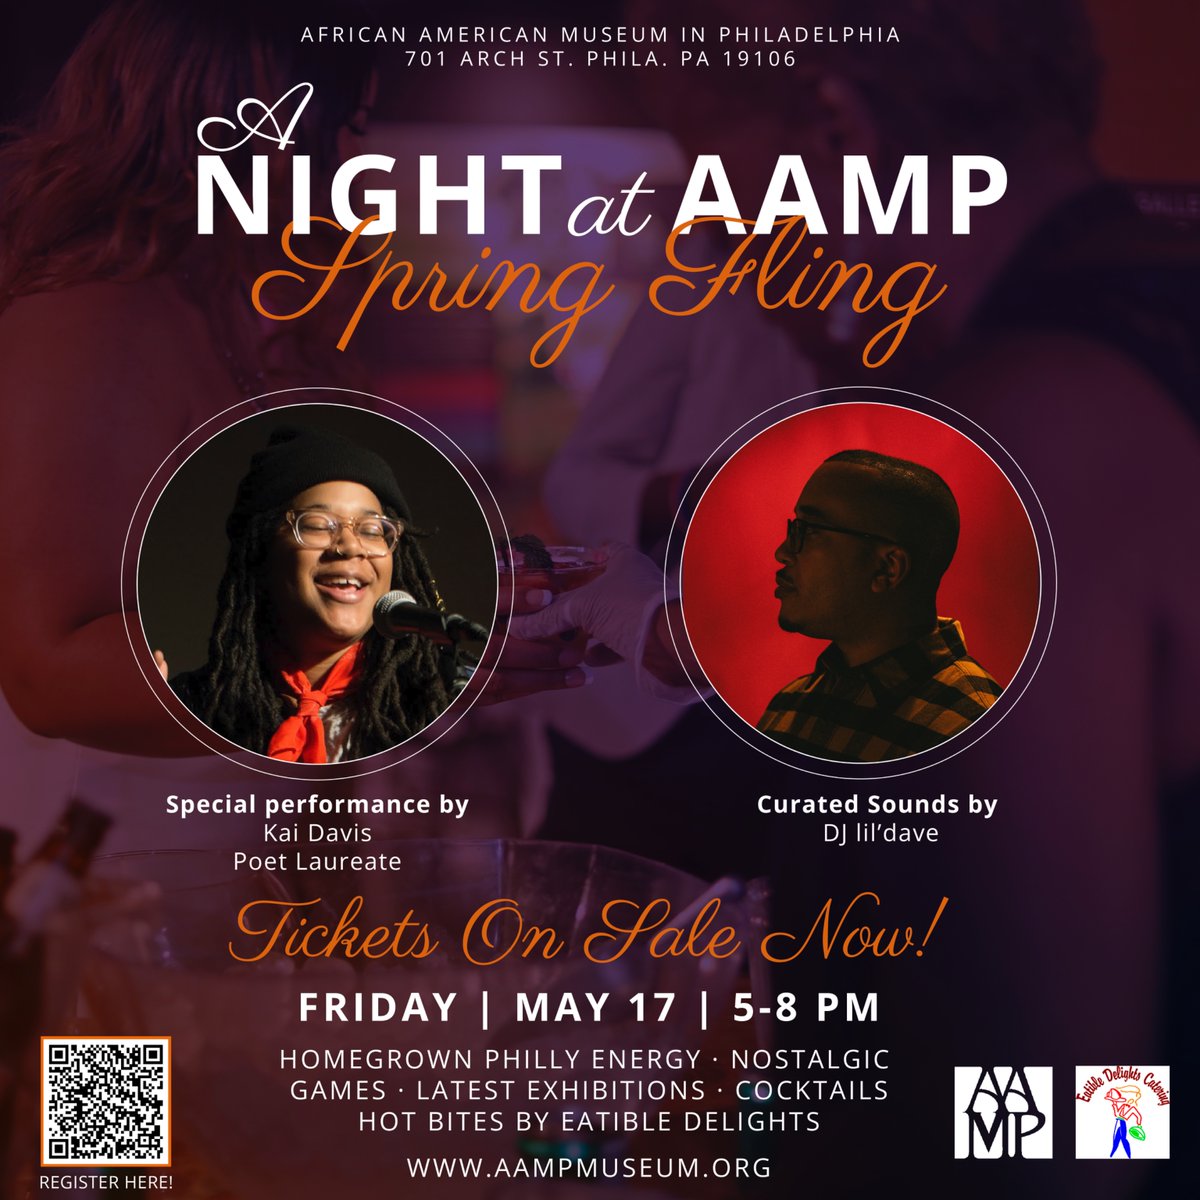 Join AAMP for a night of sophistication and fun, 05/17:A Night at AAMP: Spring Fling. Offerings include: tunes by DJ lil’dave, poetry by Kai Davis, Quizzo led by AAMP’s own, Morgan Lloyd, as well as food and drinks. Register and become a MEMBER today at aampmuseum.org